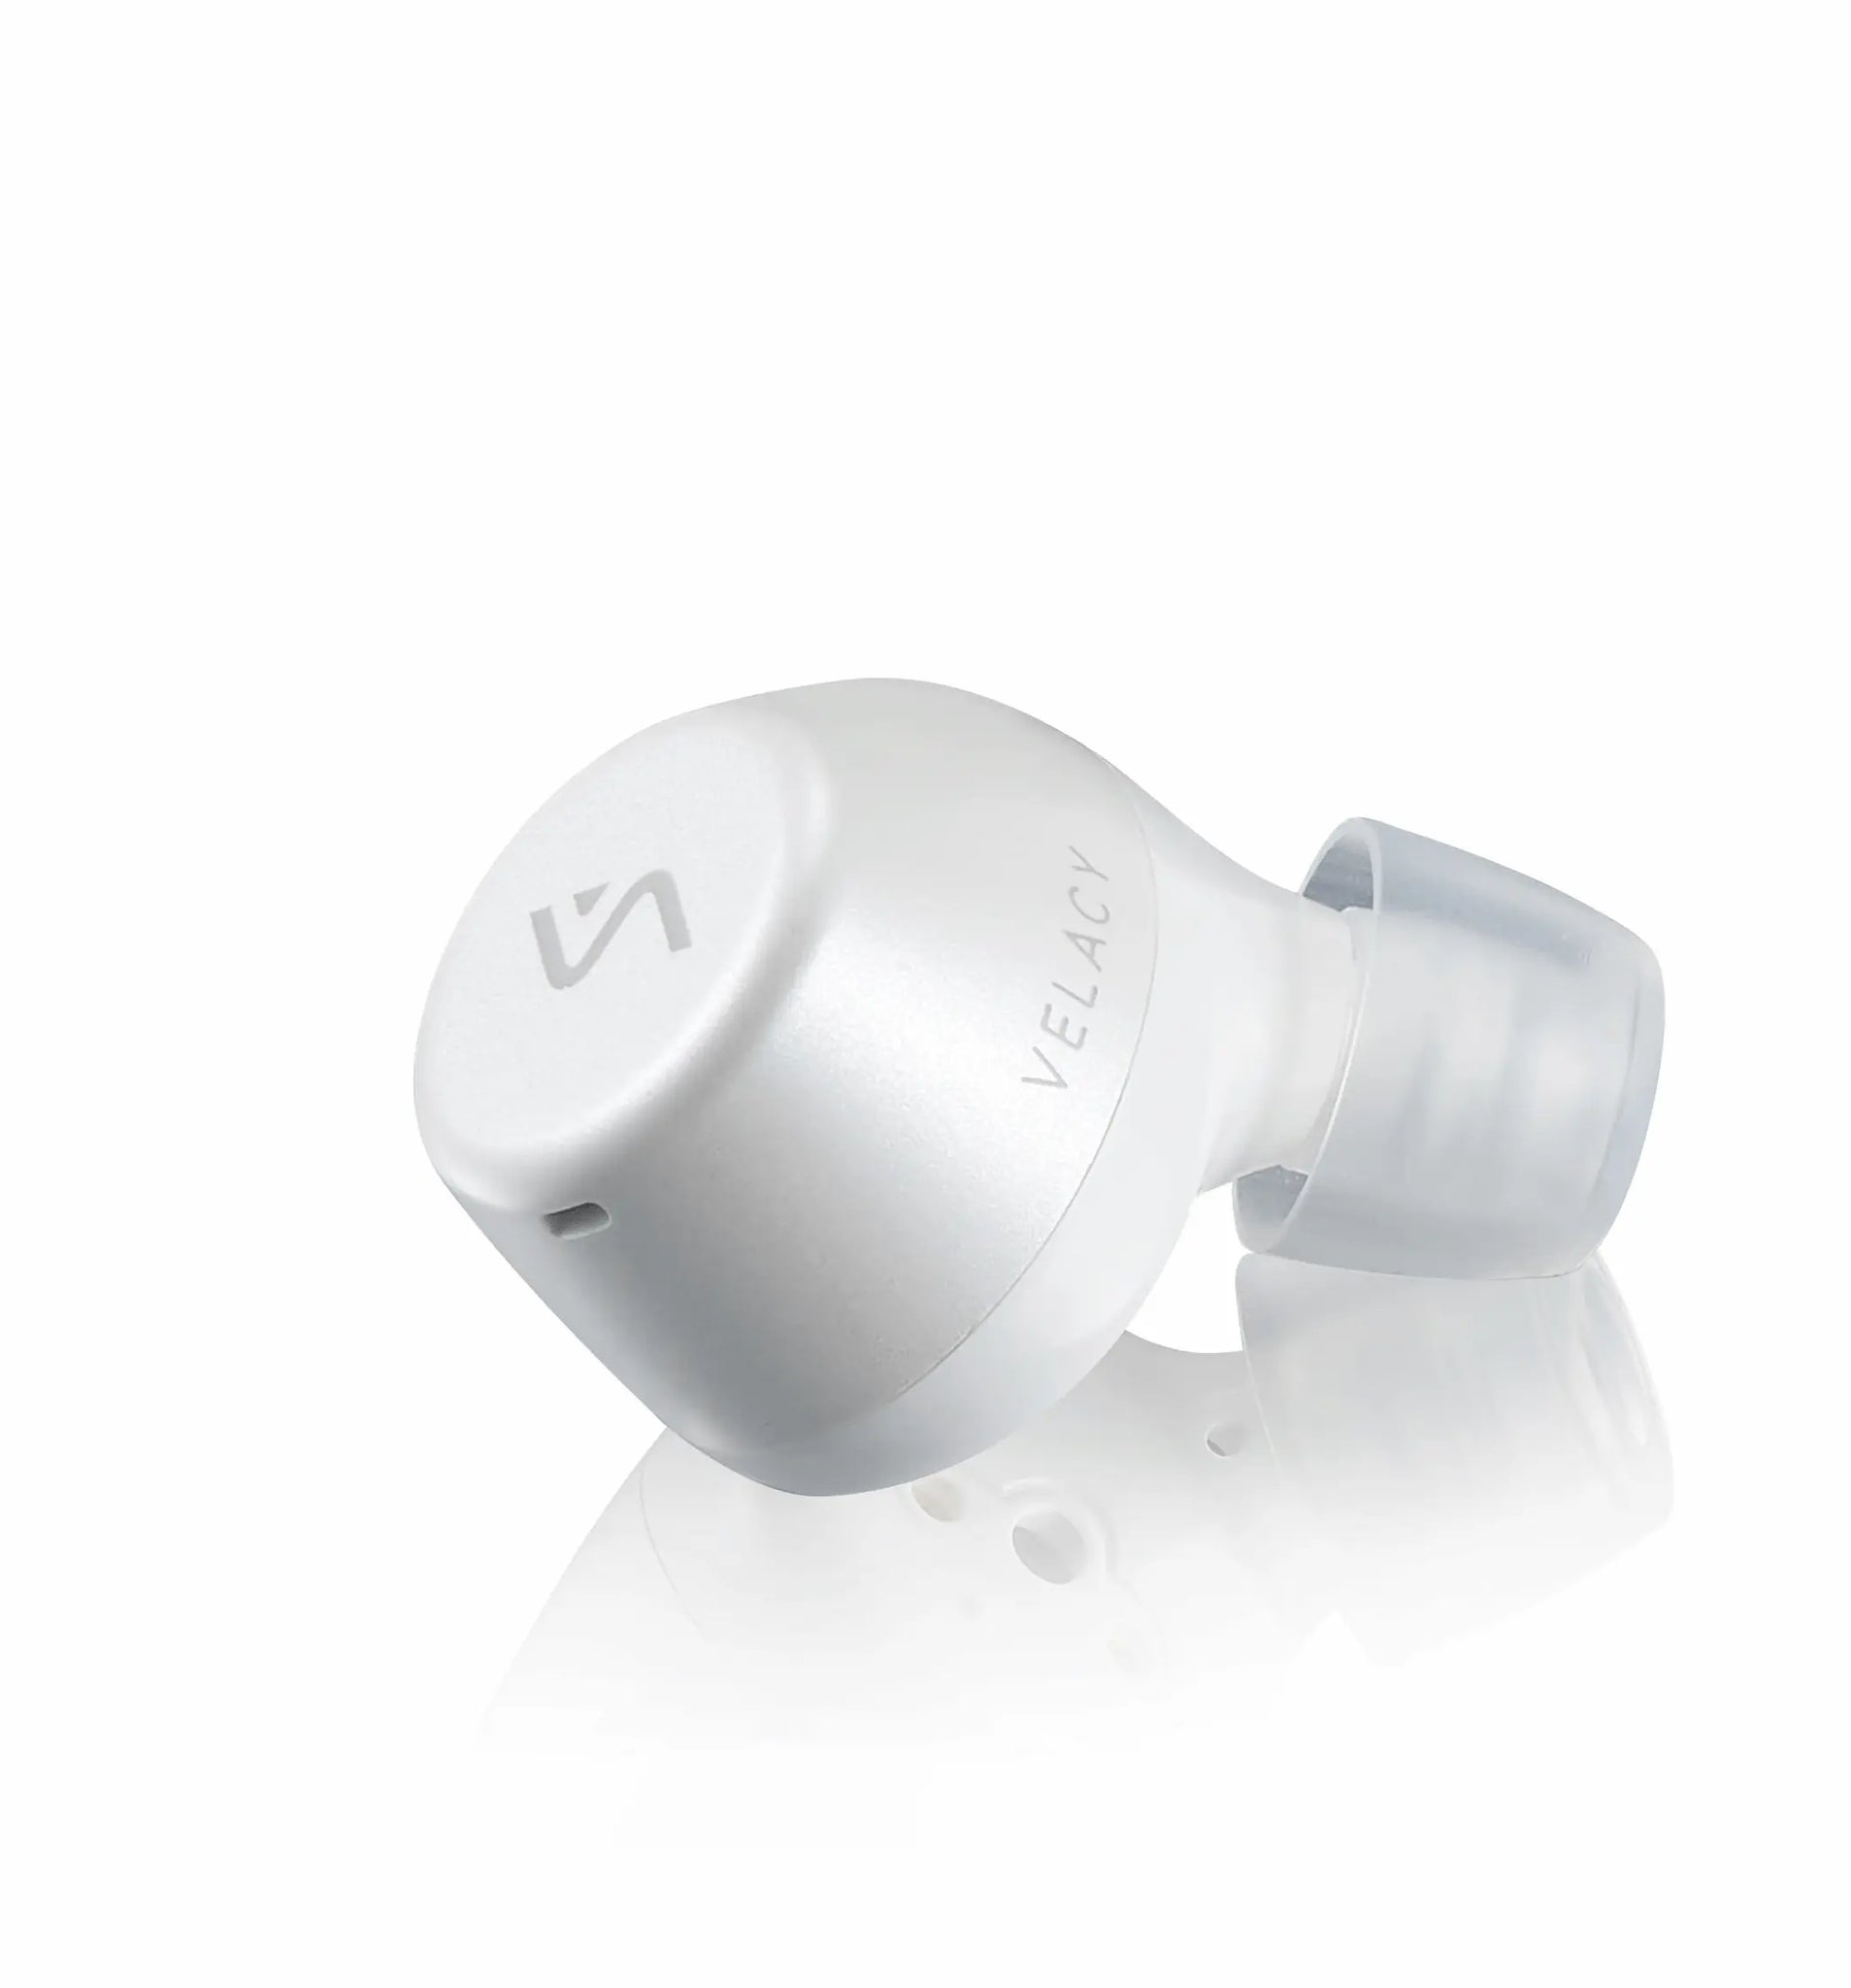 <img src="crystal 5a single white earbud.png" alt="single white earbud">